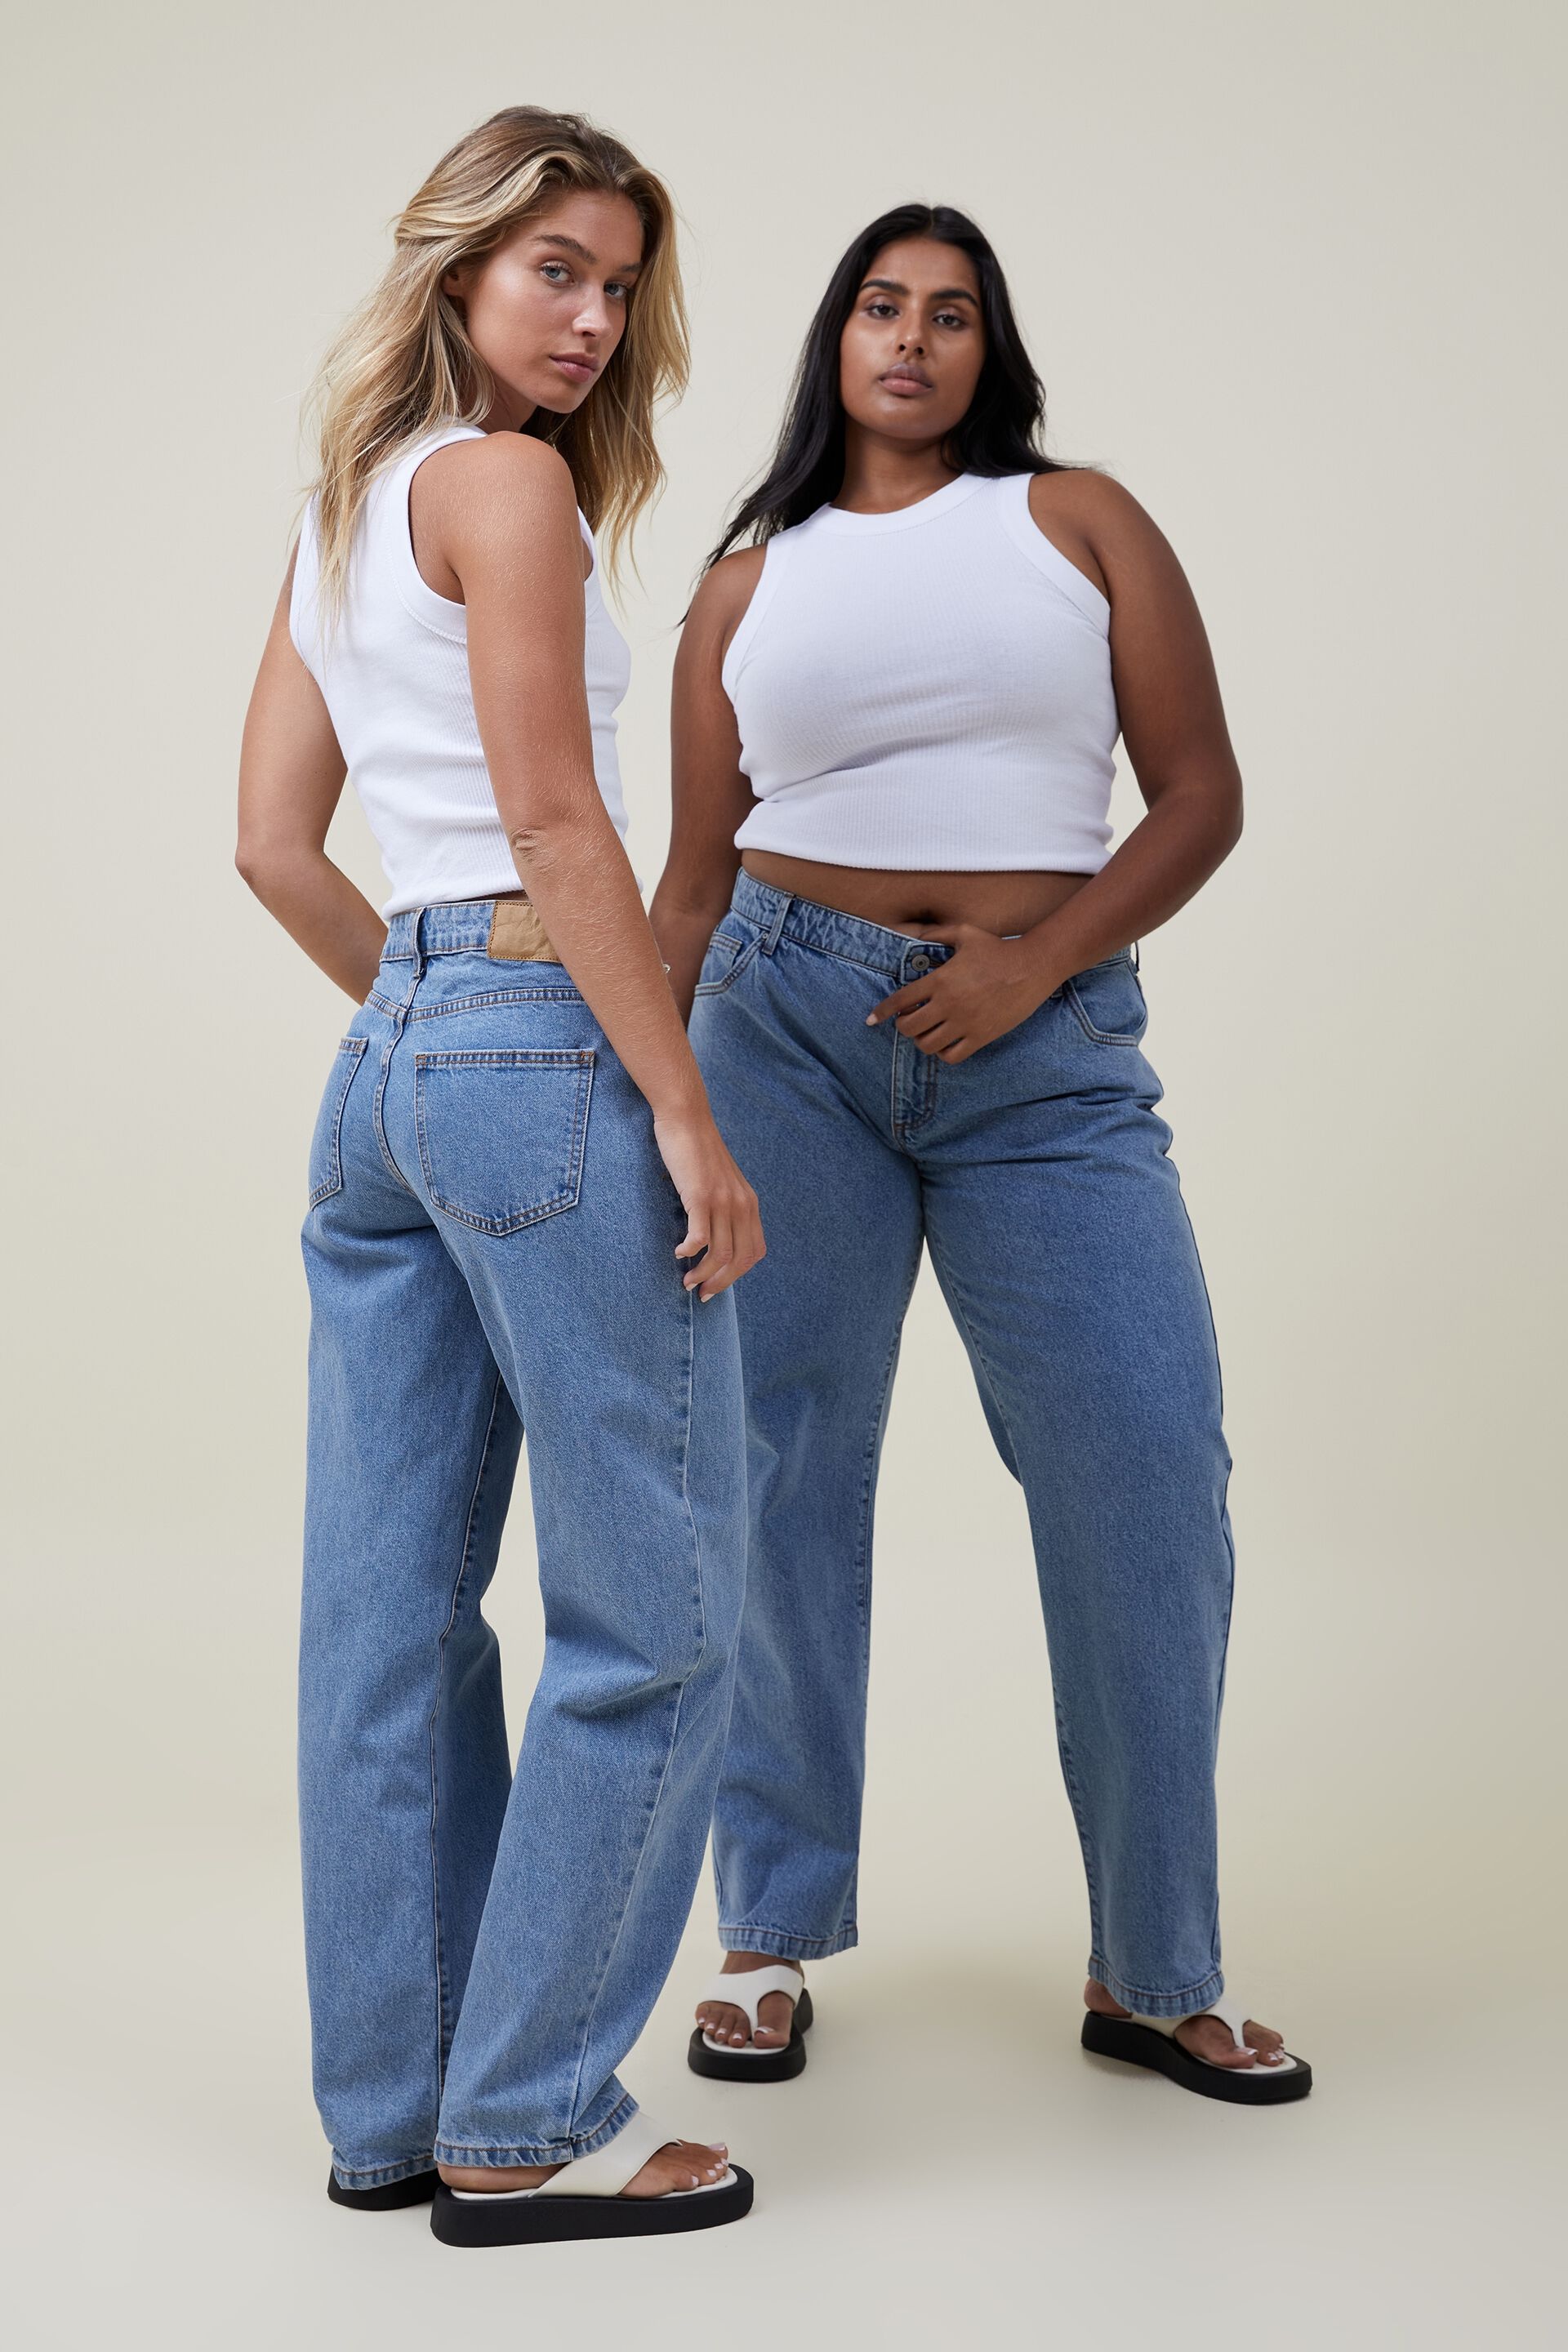 Reviews Of The $34 Walmart Jeans That Everyone Is Talking About